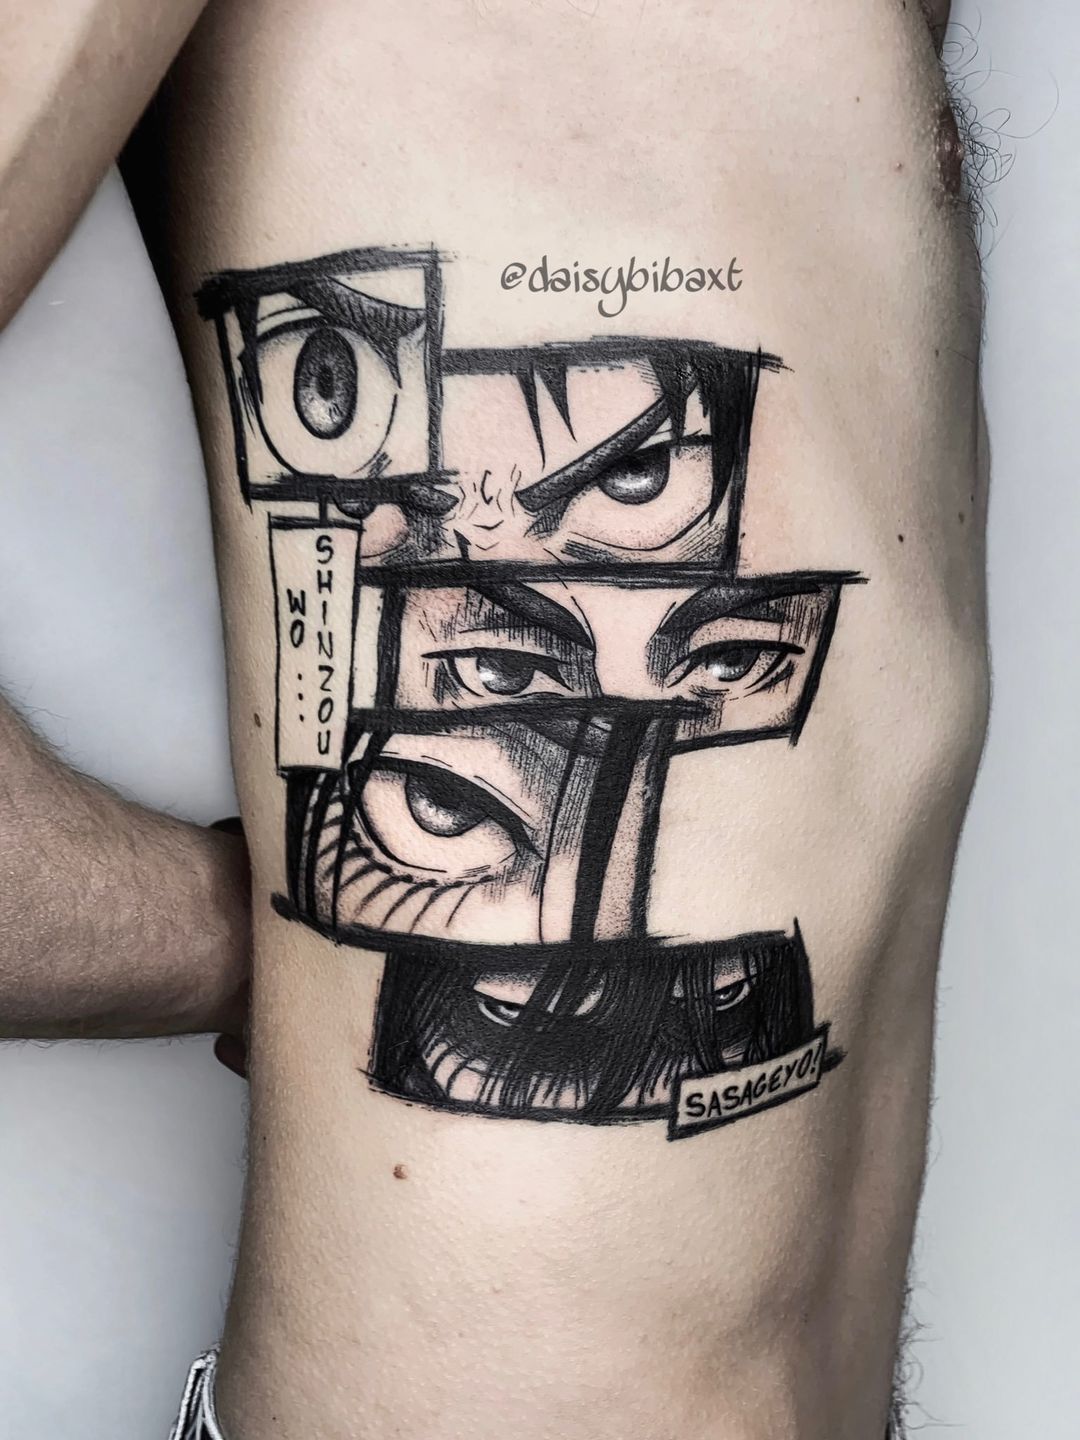 Check out my AOT tattoo  rattackontitan